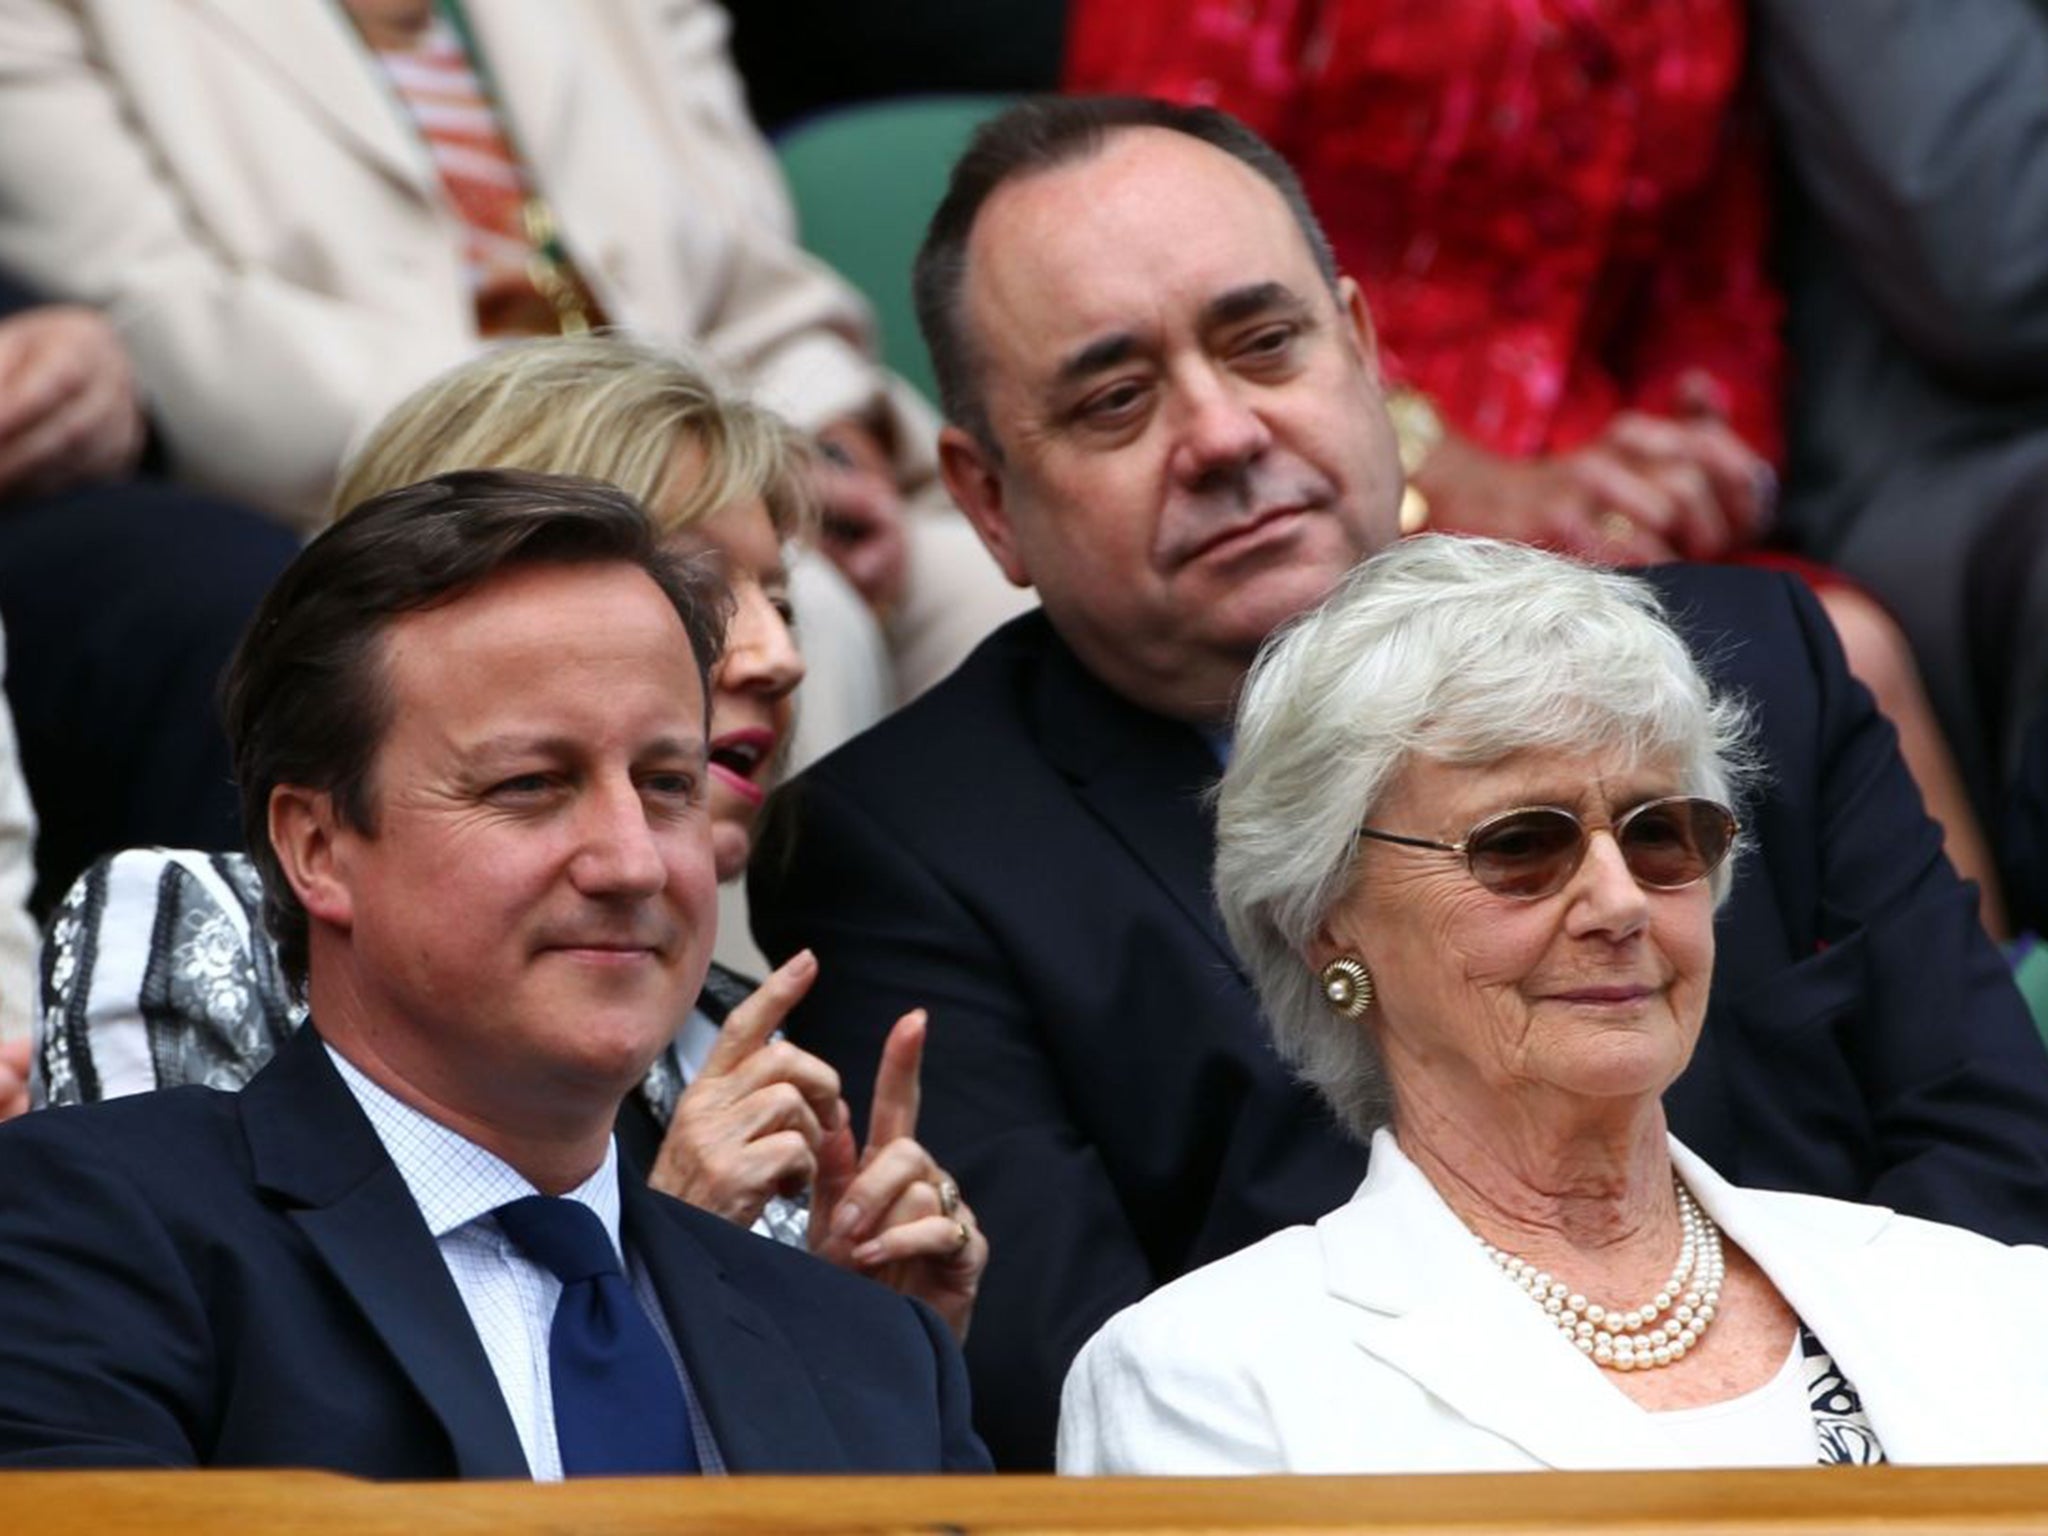 David Cameron with his mother Mary - who is also campaigning against the cuts - at Wimbledon in 2015